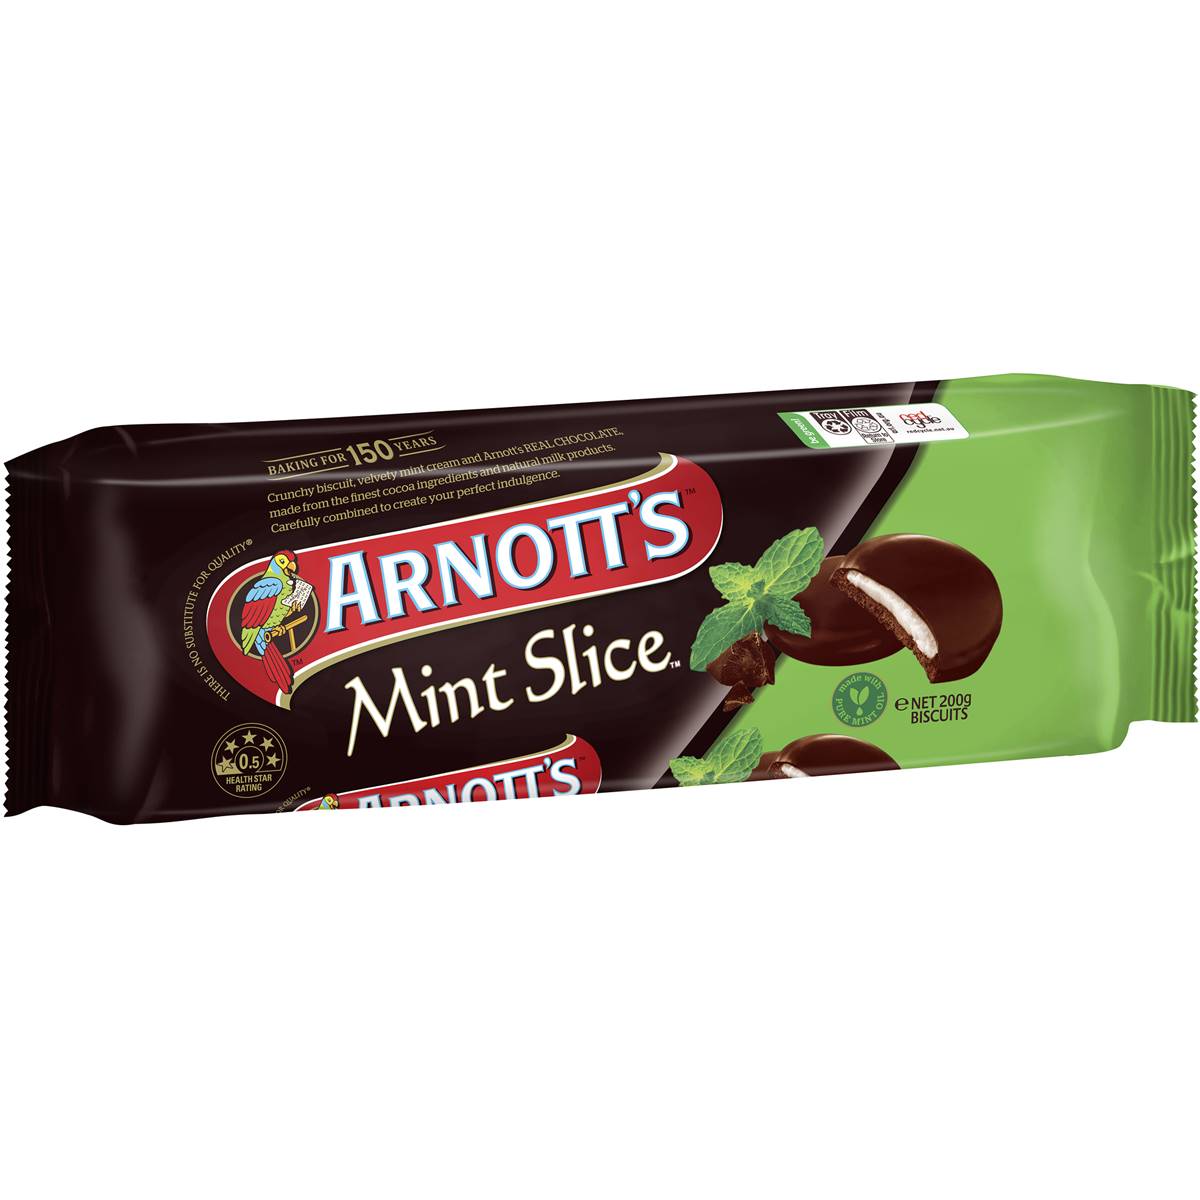 Arnotts Mint Slice Chocolate Biscuits 200g